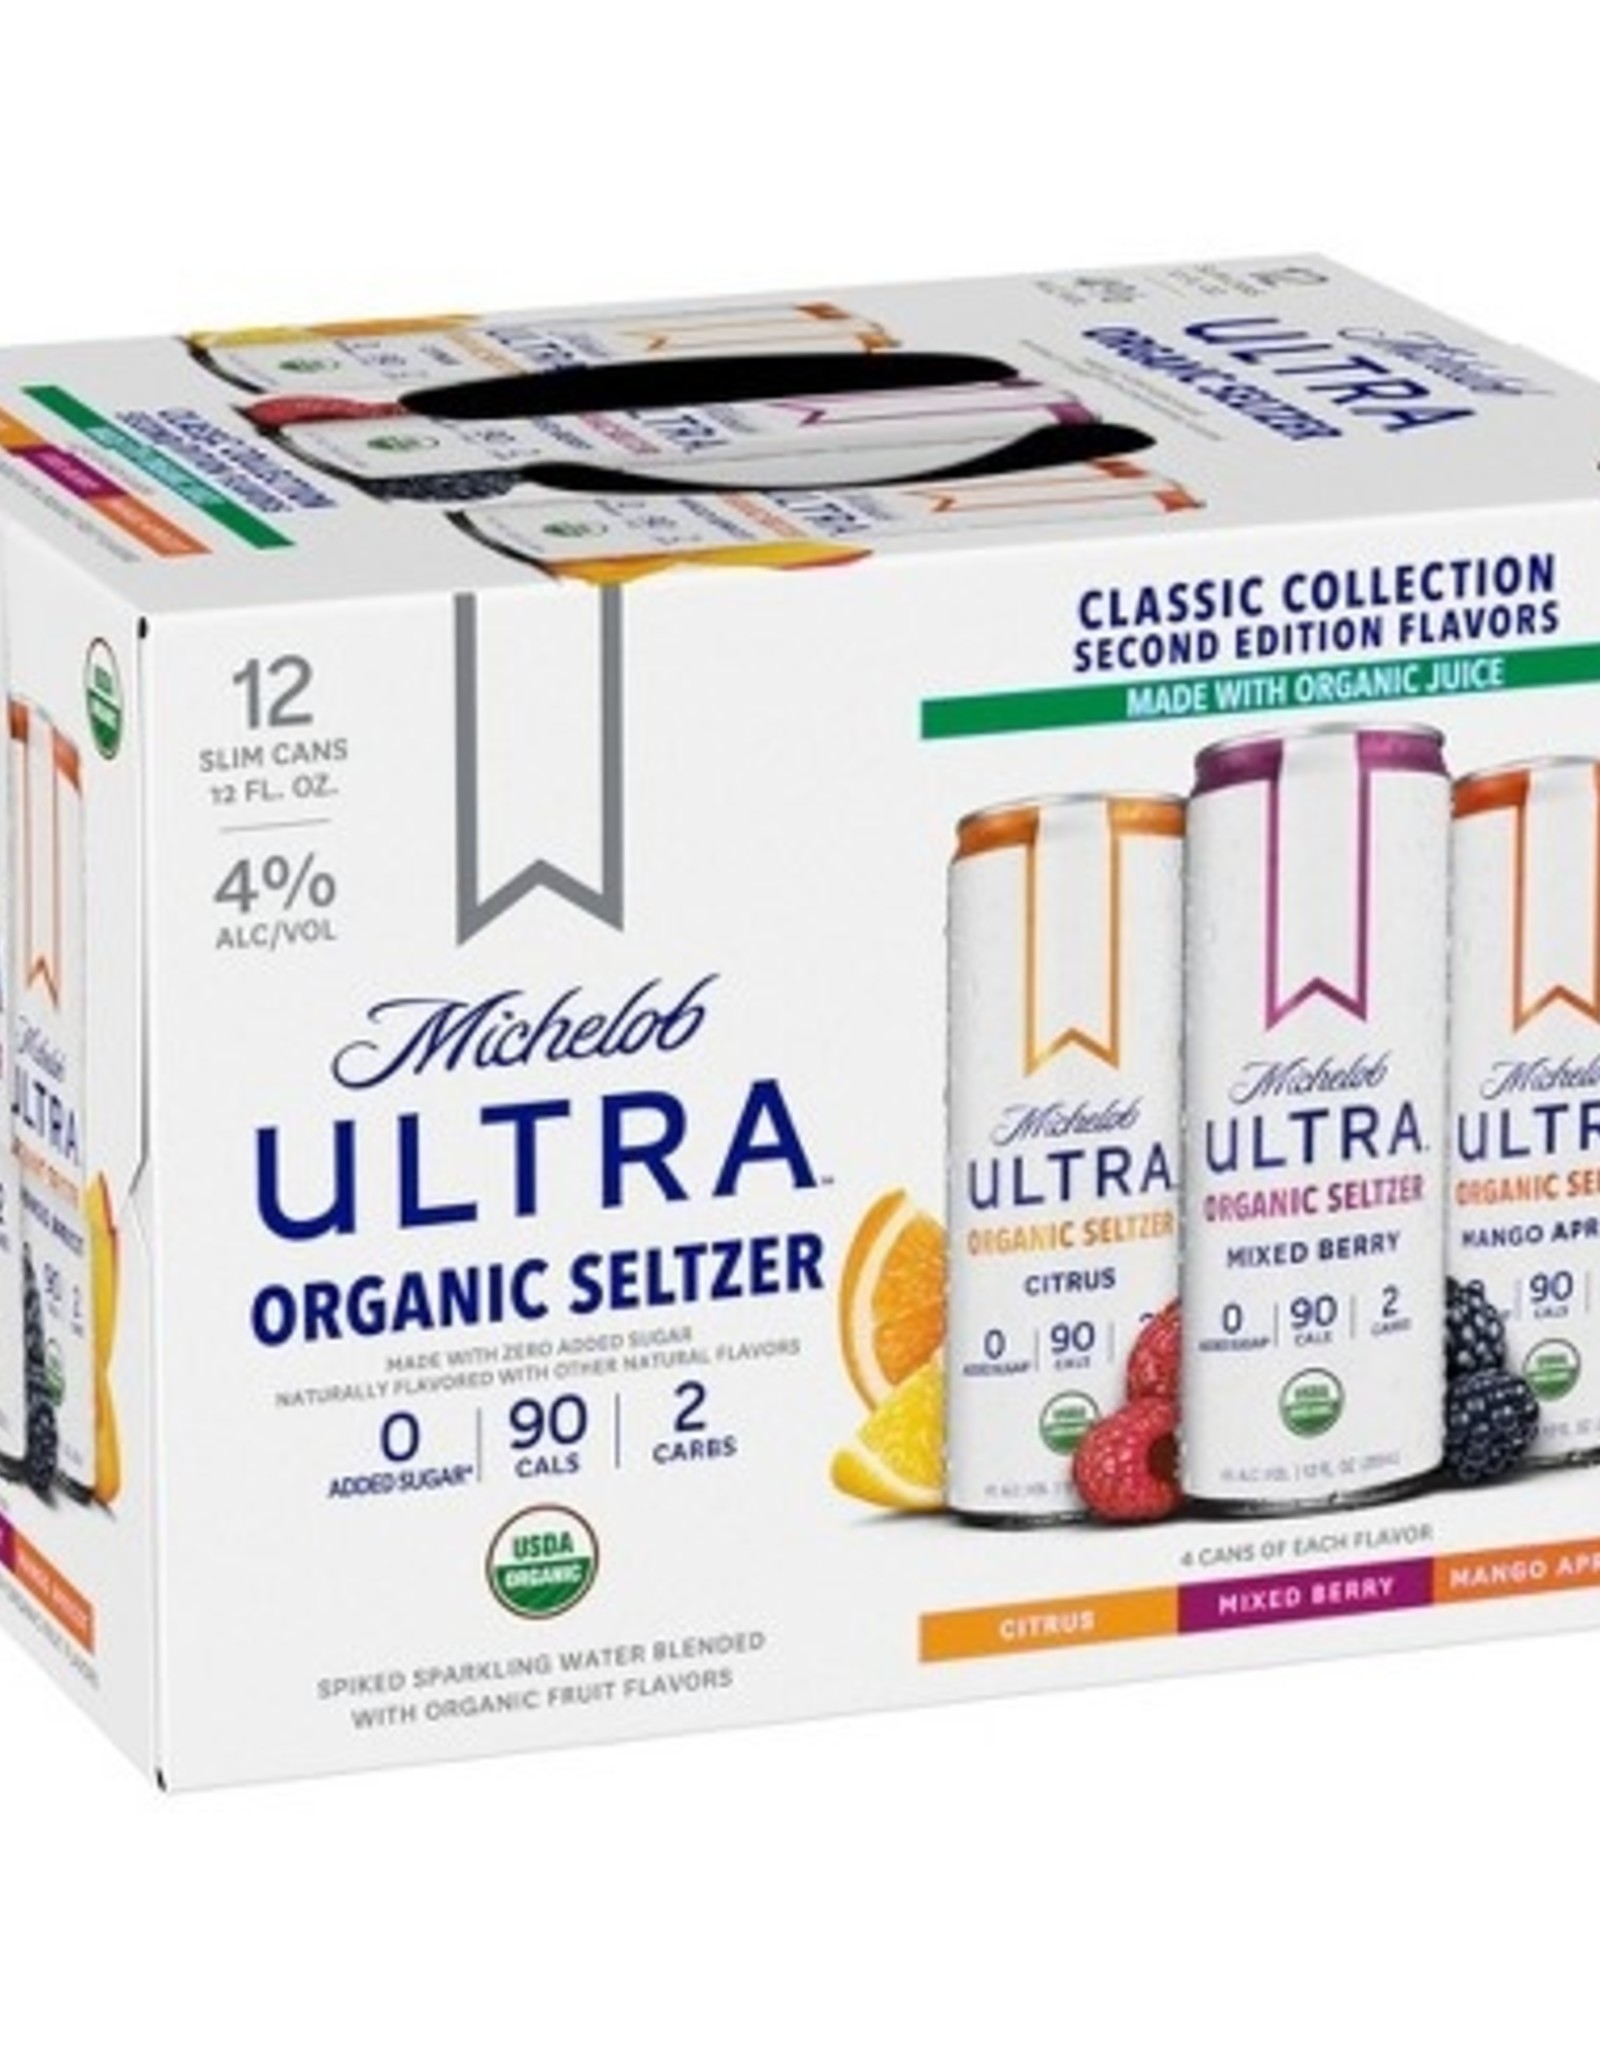 Michelob Ultra Organic Seltzer Classic Collection 12x12 oz slim cans